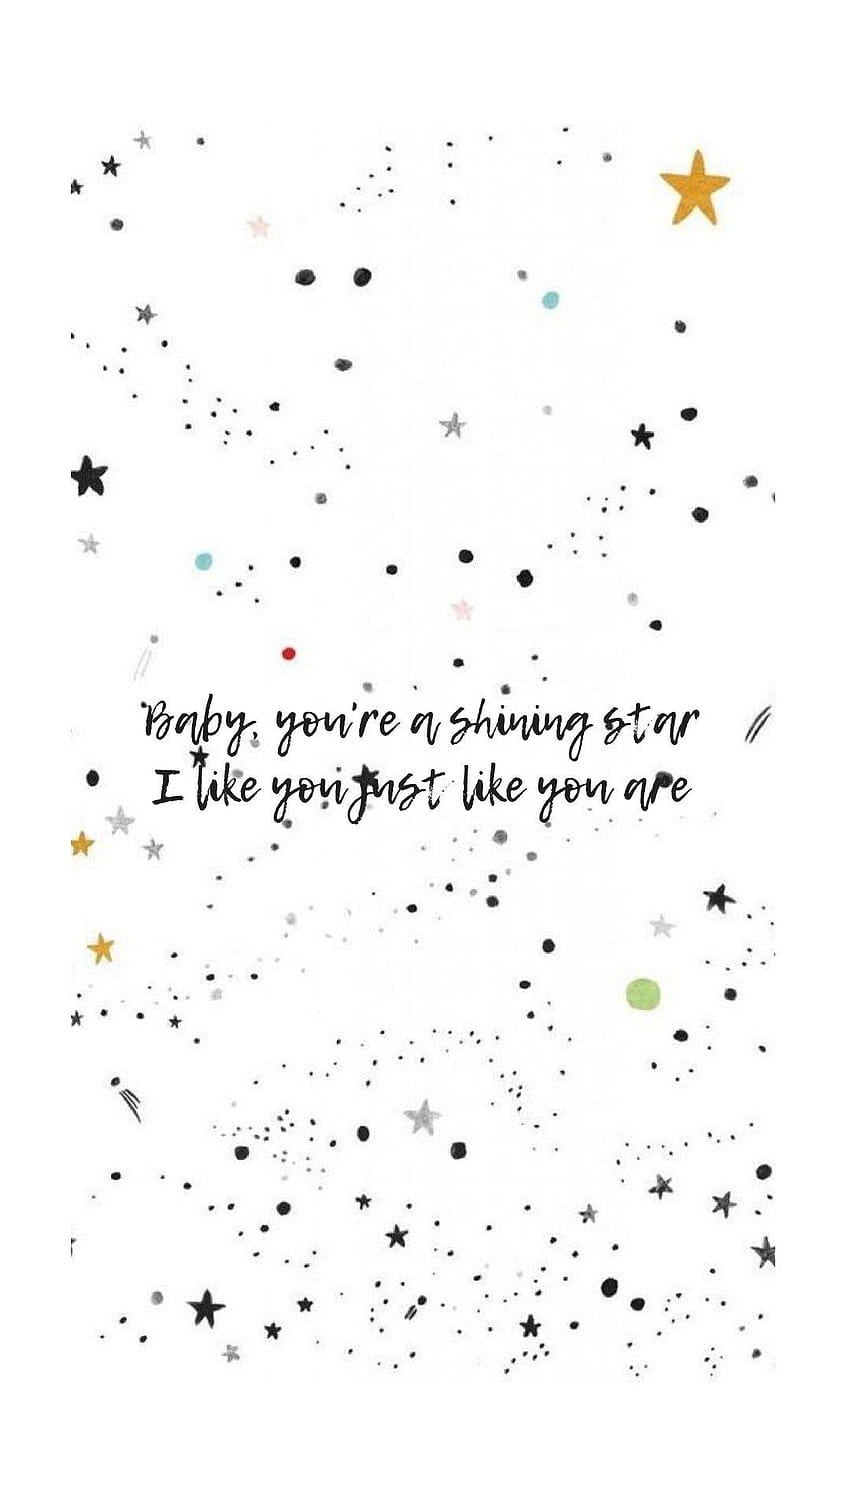 Shining star by Bebe Rexha from the Expectations album, expectations quotes HD phone wallpaper